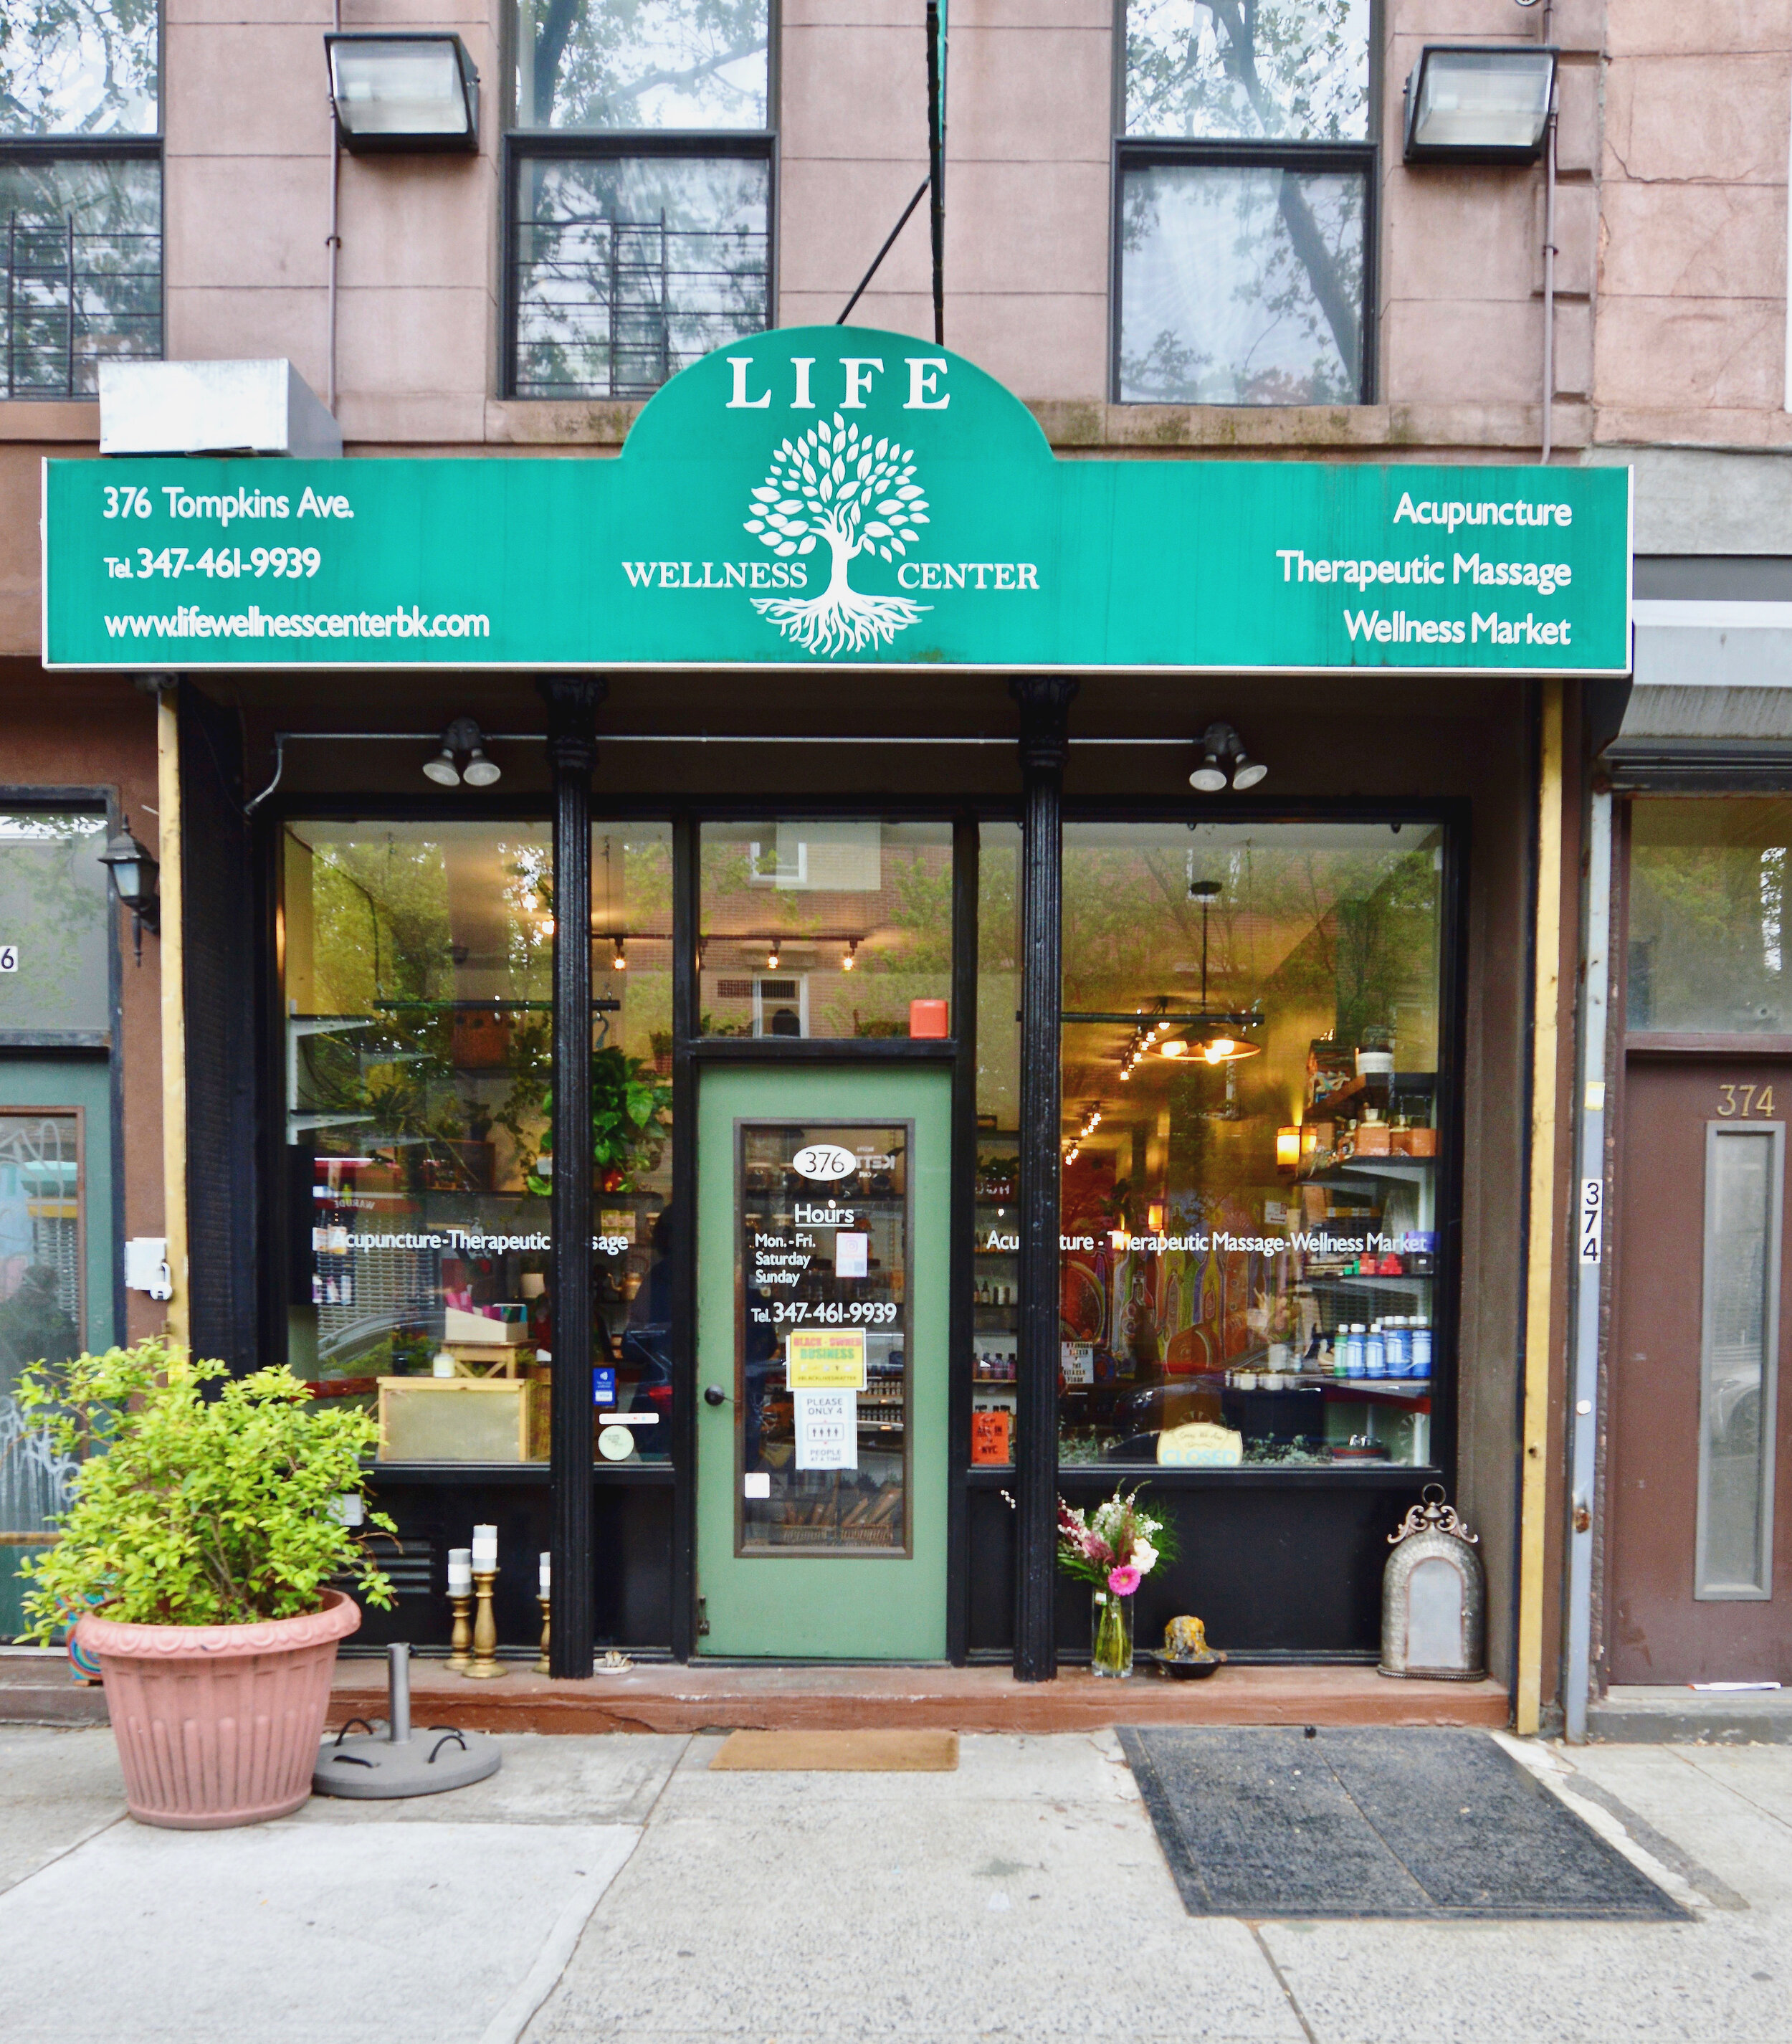 Bioresonance therapy in NYC - Tree of Life Acupuncture NYC